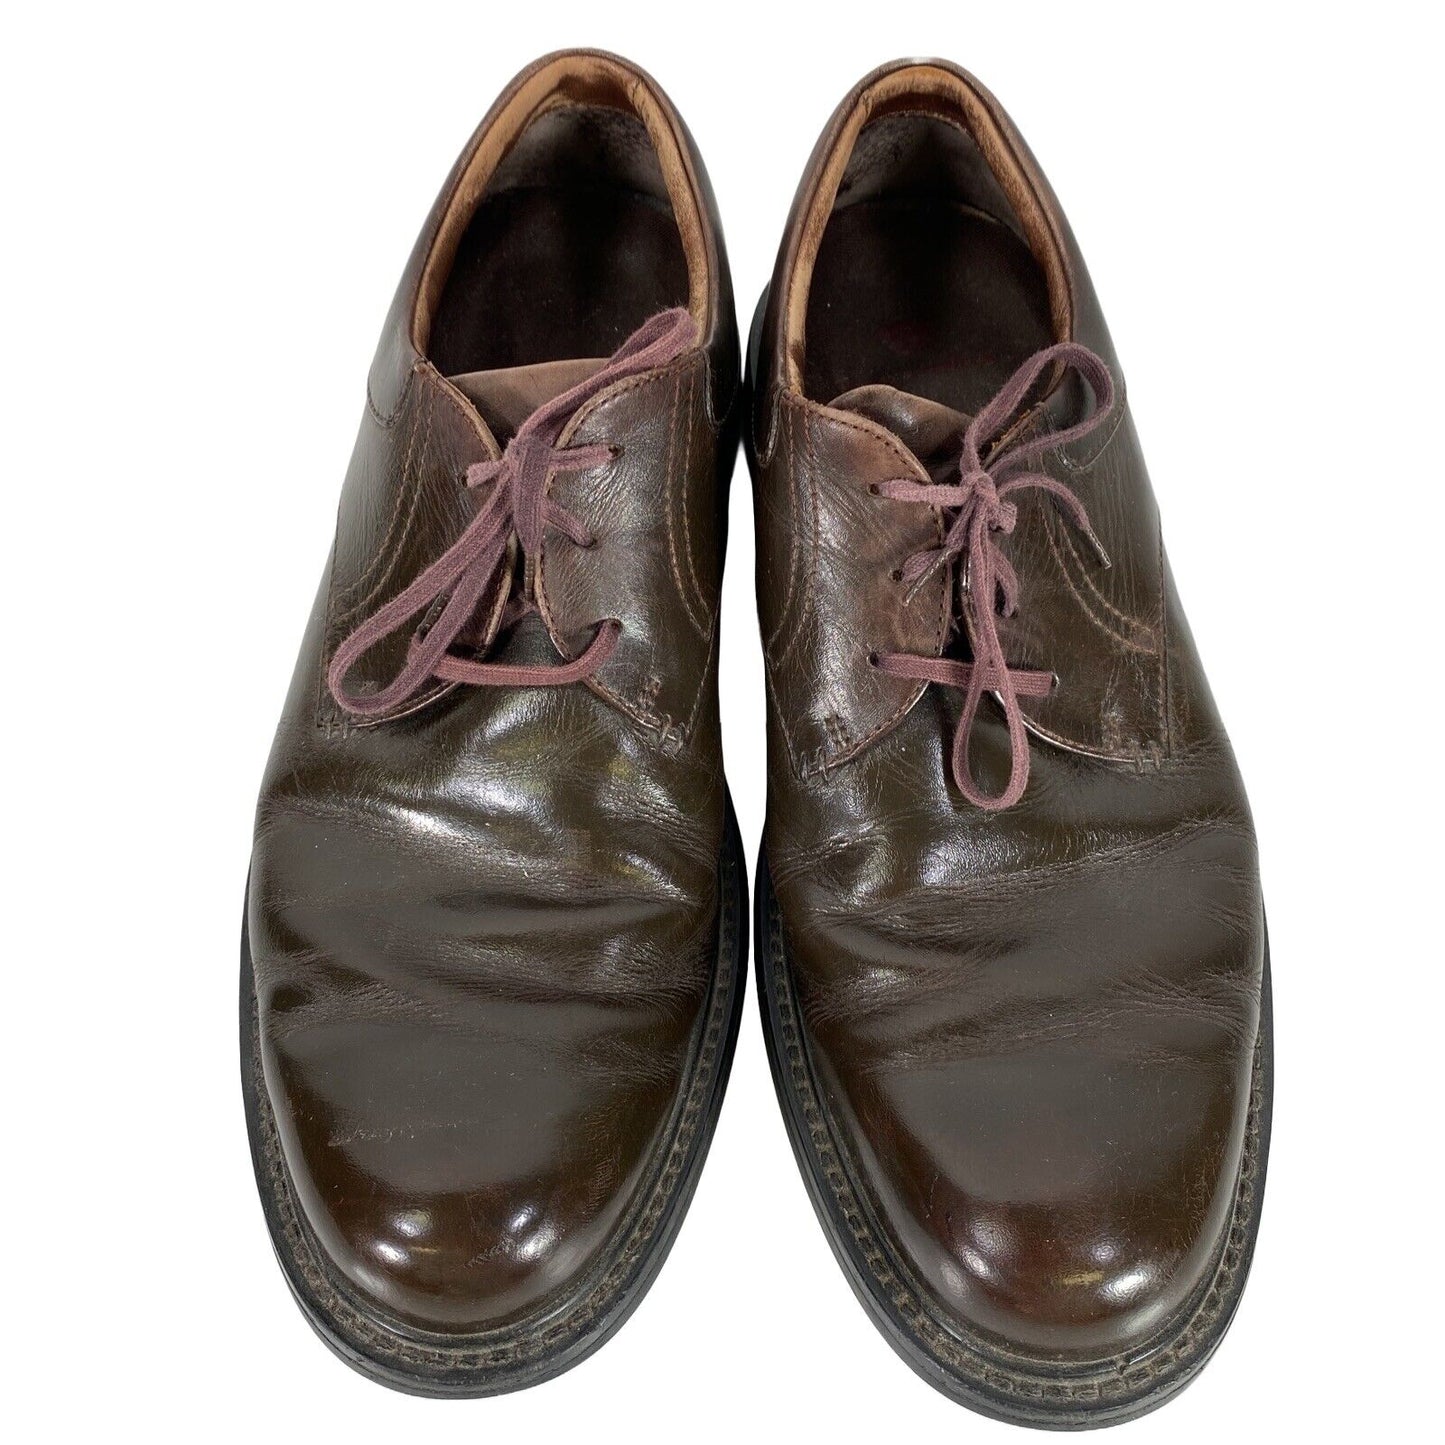 Red Wings Men's Brown Leather Lace Up Oxford Shoes - 11.5B